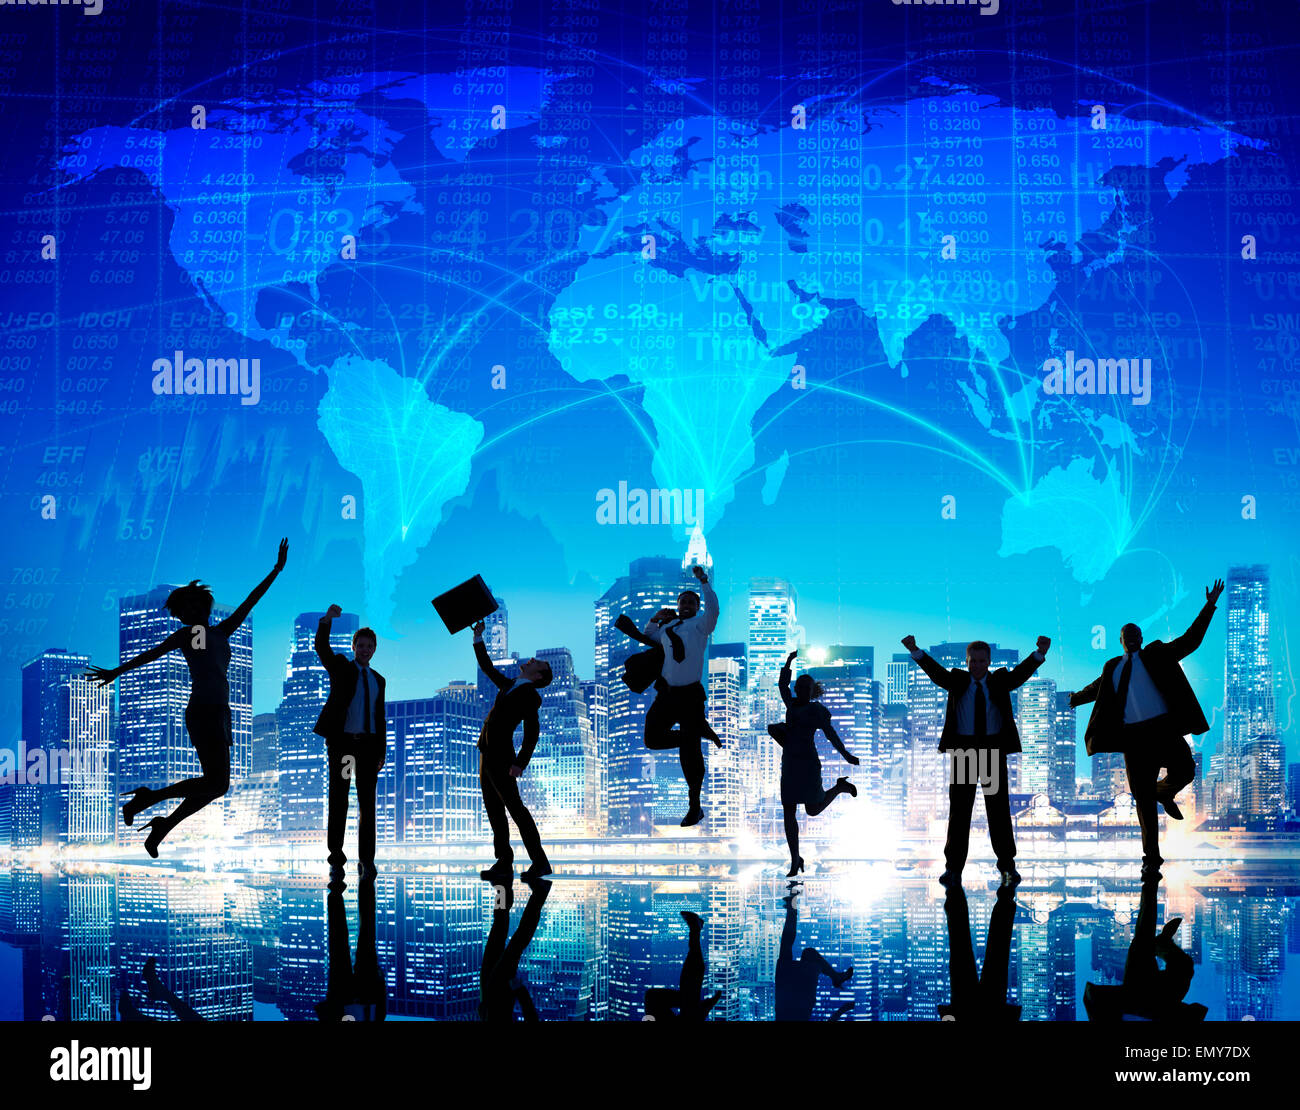 Silhouette People Global Business Cityscape Team Concept Stock Photo